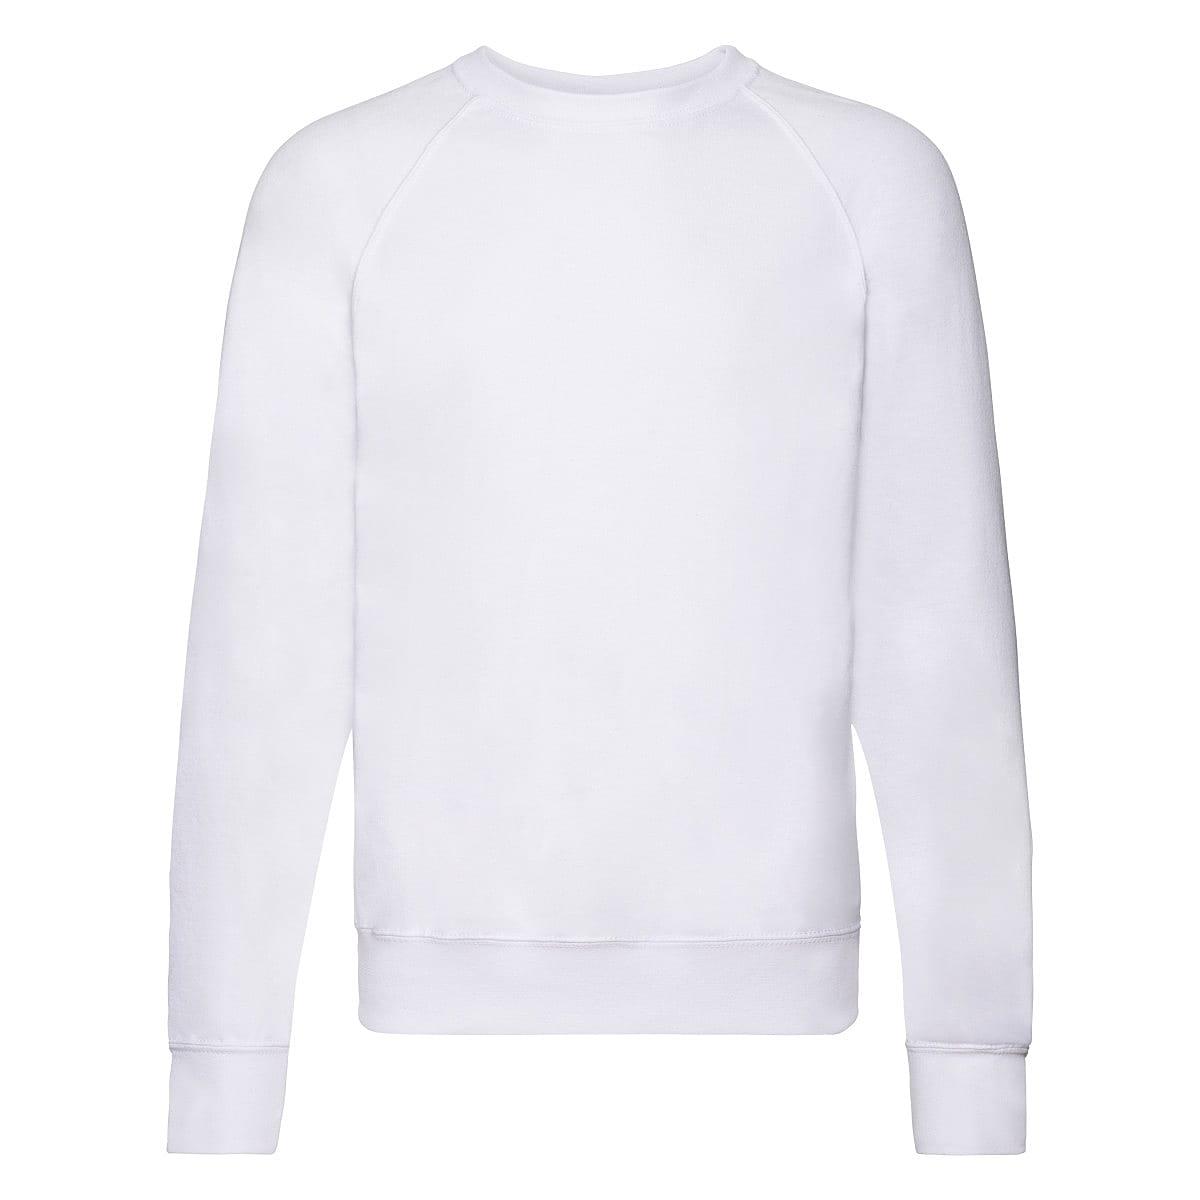 Fruit Of The Loom Mens Lightweight Raglan Sweater in White (Product Code: 62138)